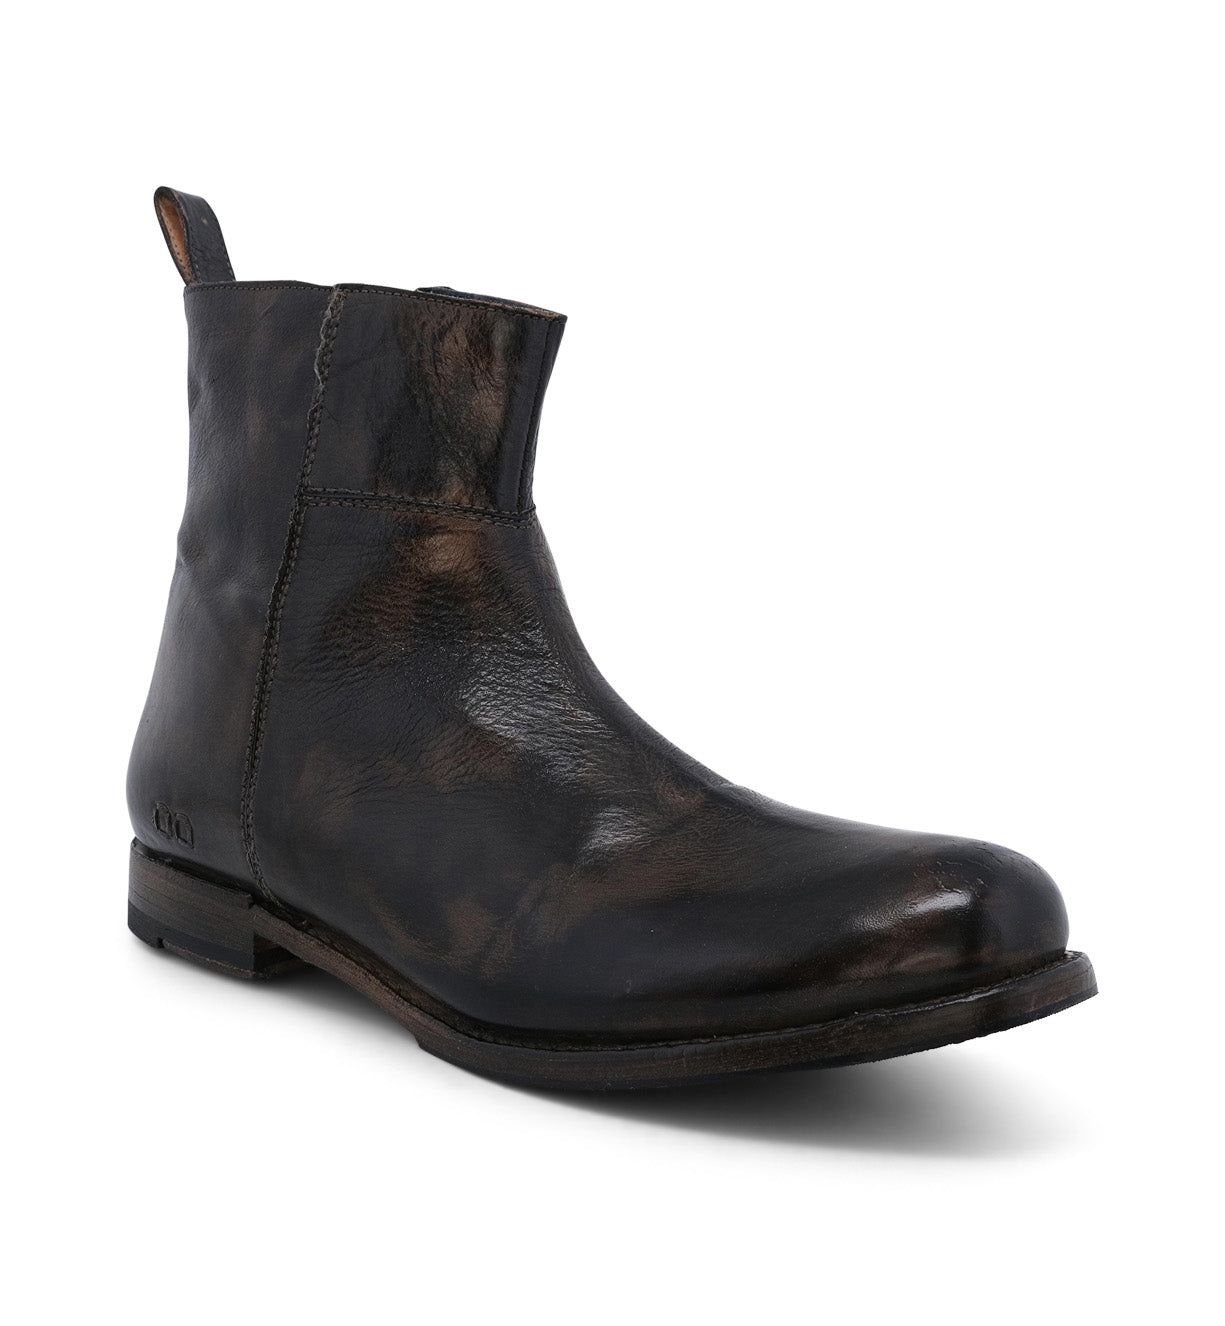 A men's black leather ankle boot, the Kaldi by Bed Stu.